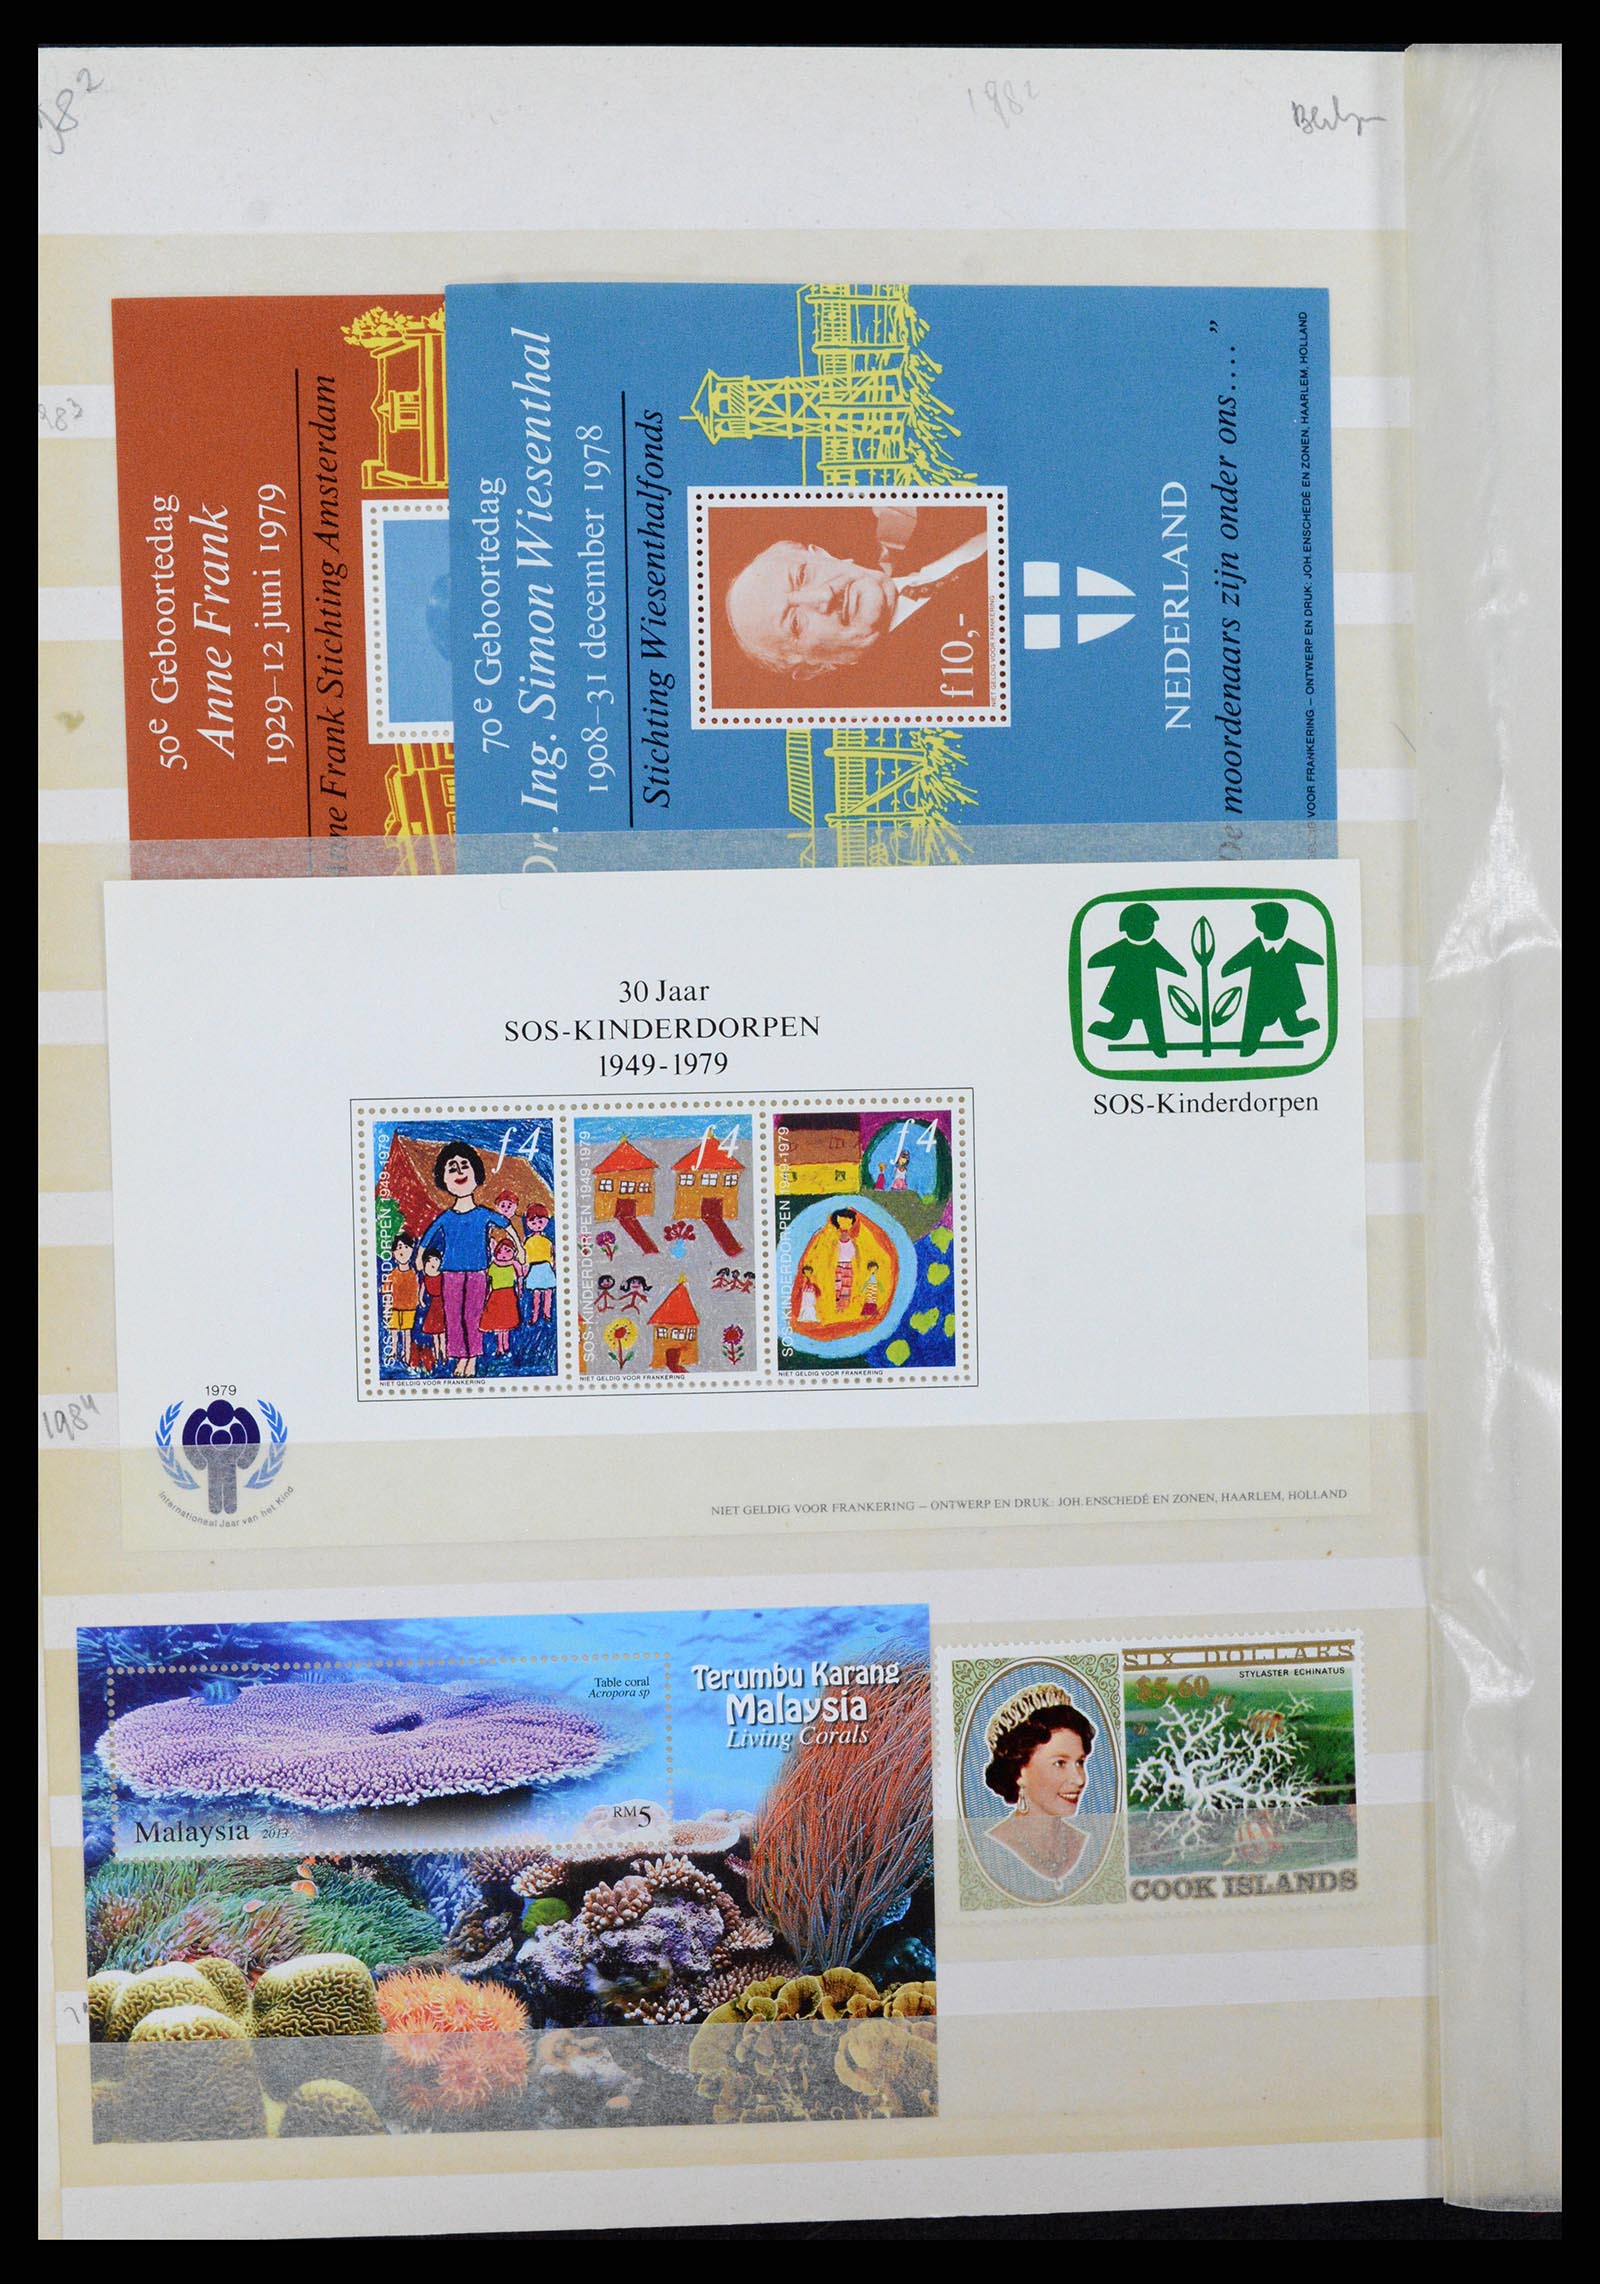 37465 071 - Stamp collection 37465 Thematics fishes and sealife till 2021!!